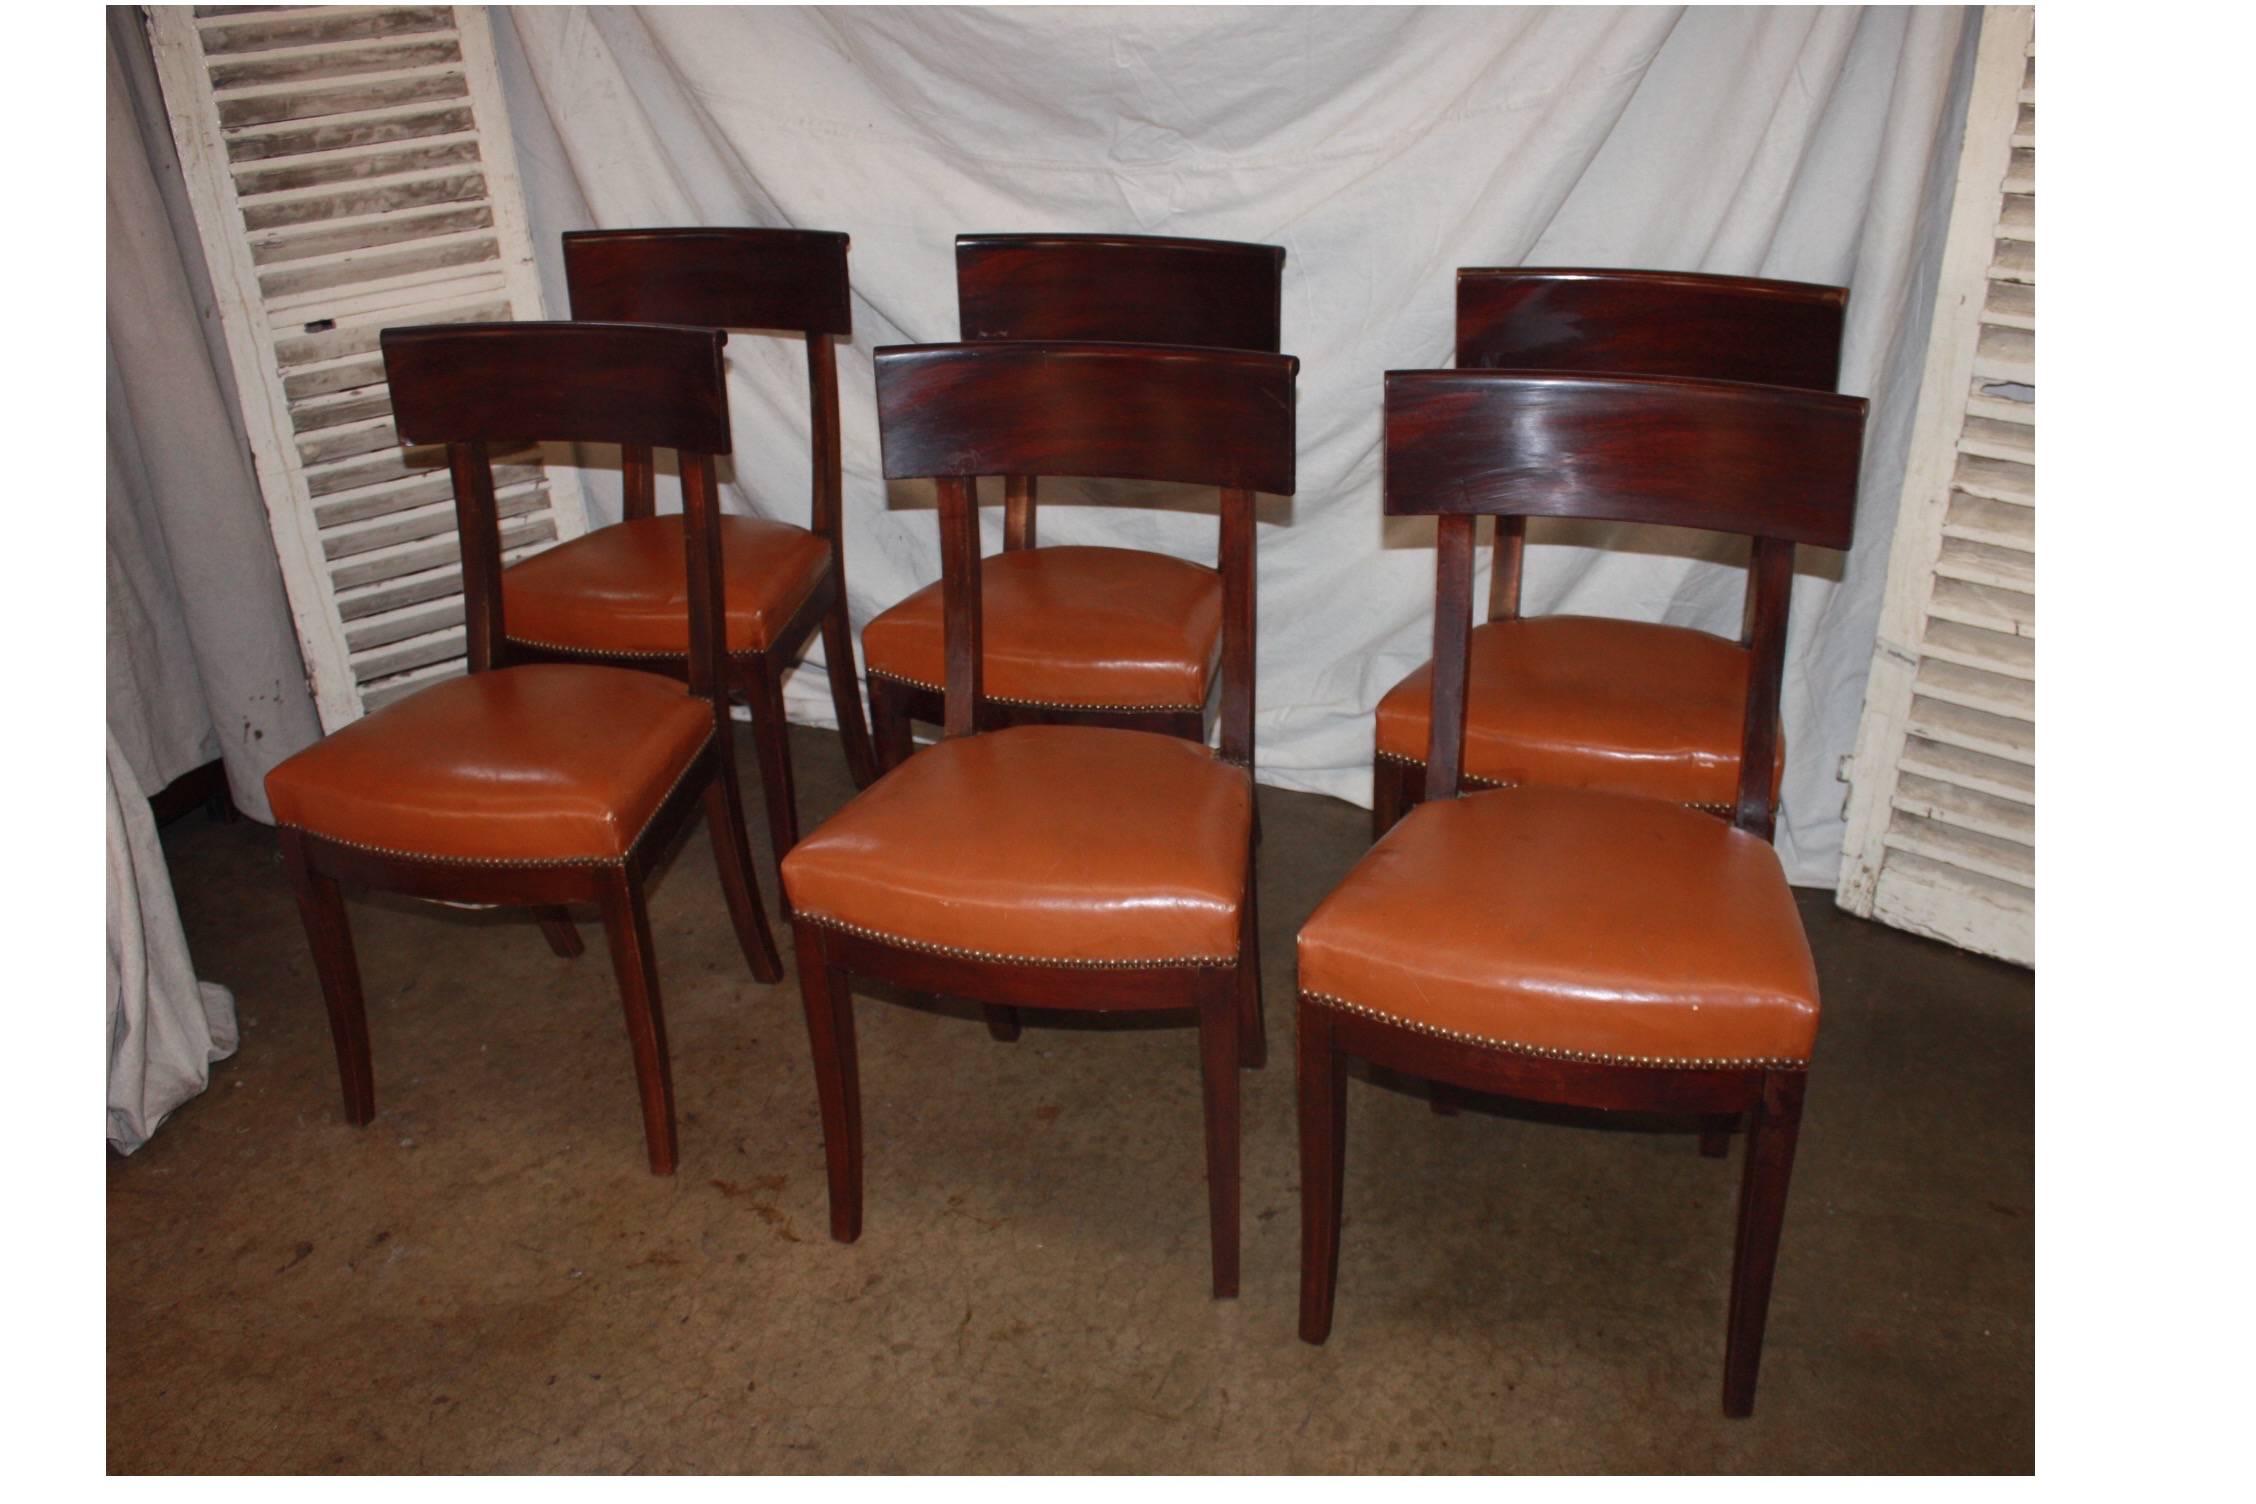 Beautiful set of French Directoire chairs.